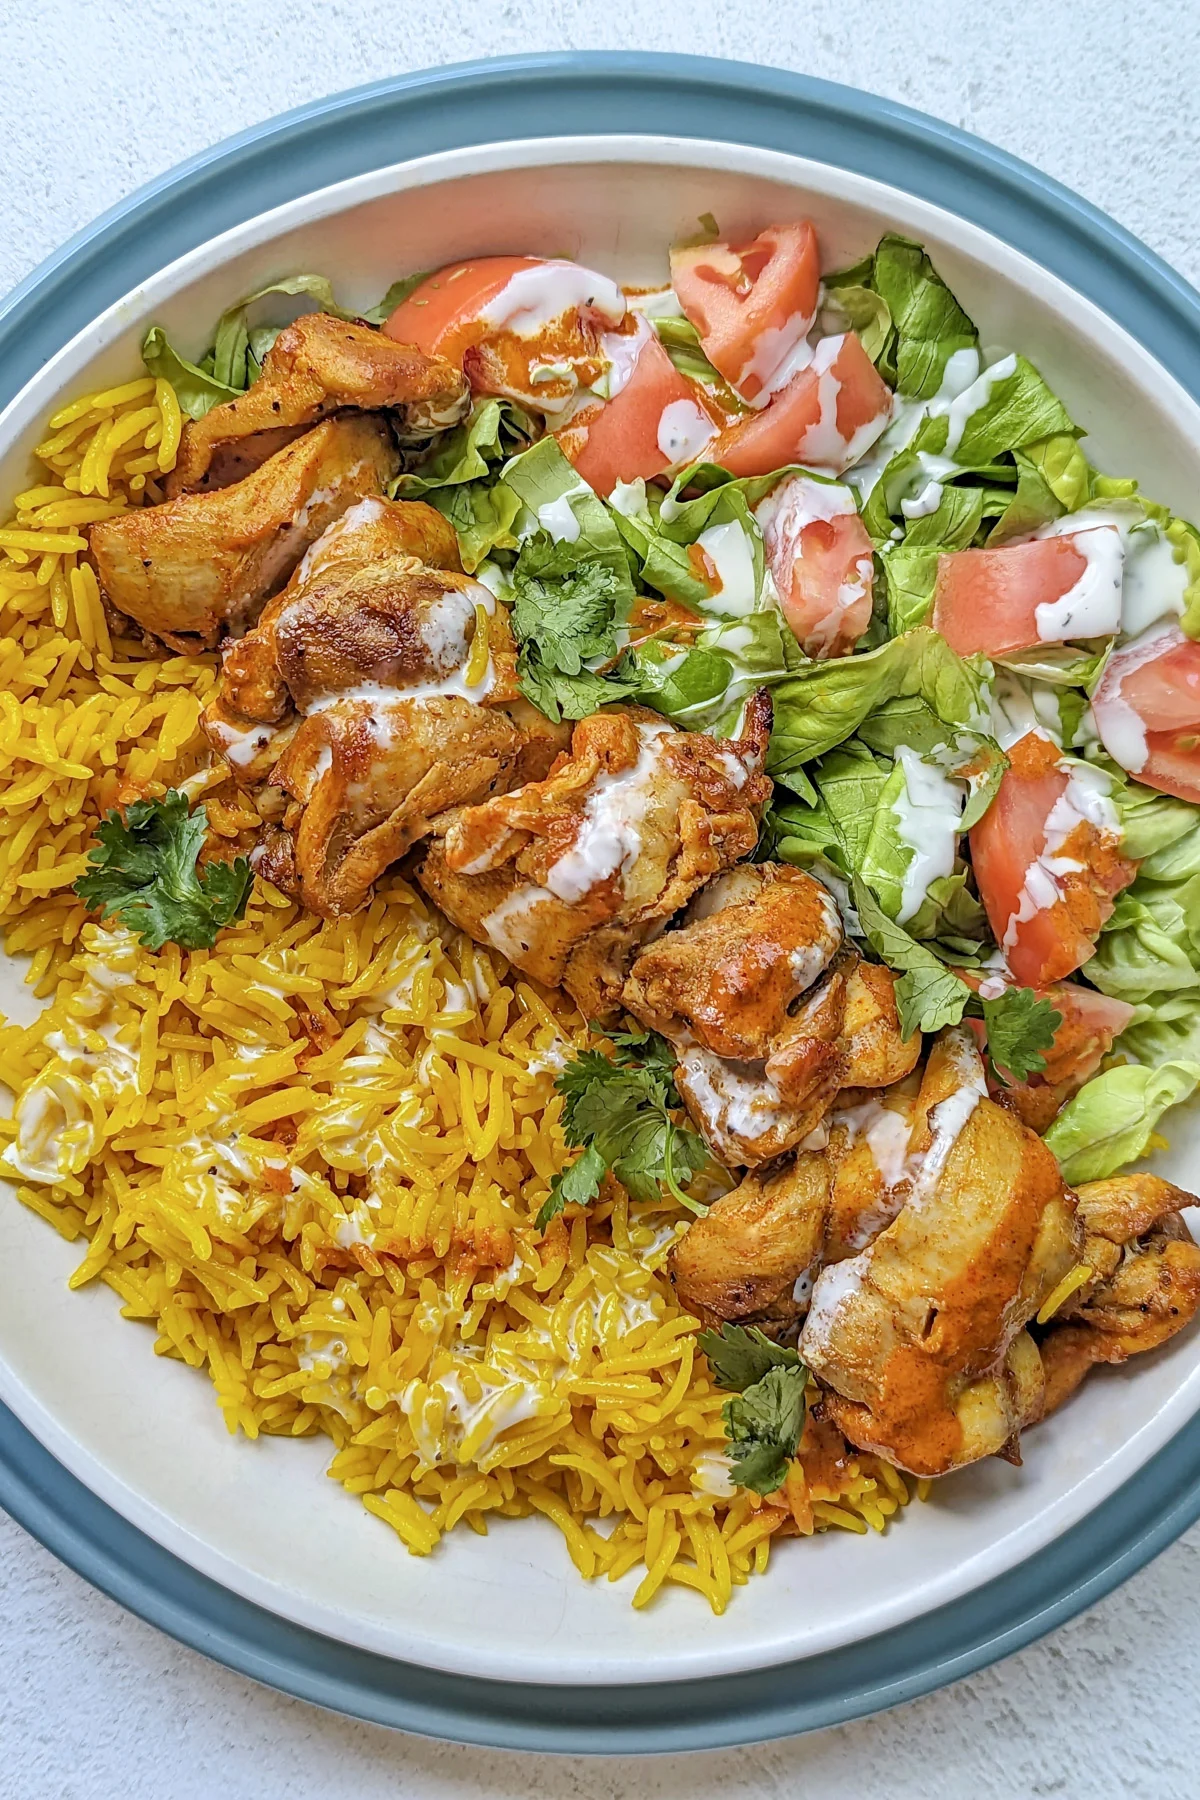 Halal chicken ove rice and a salad.